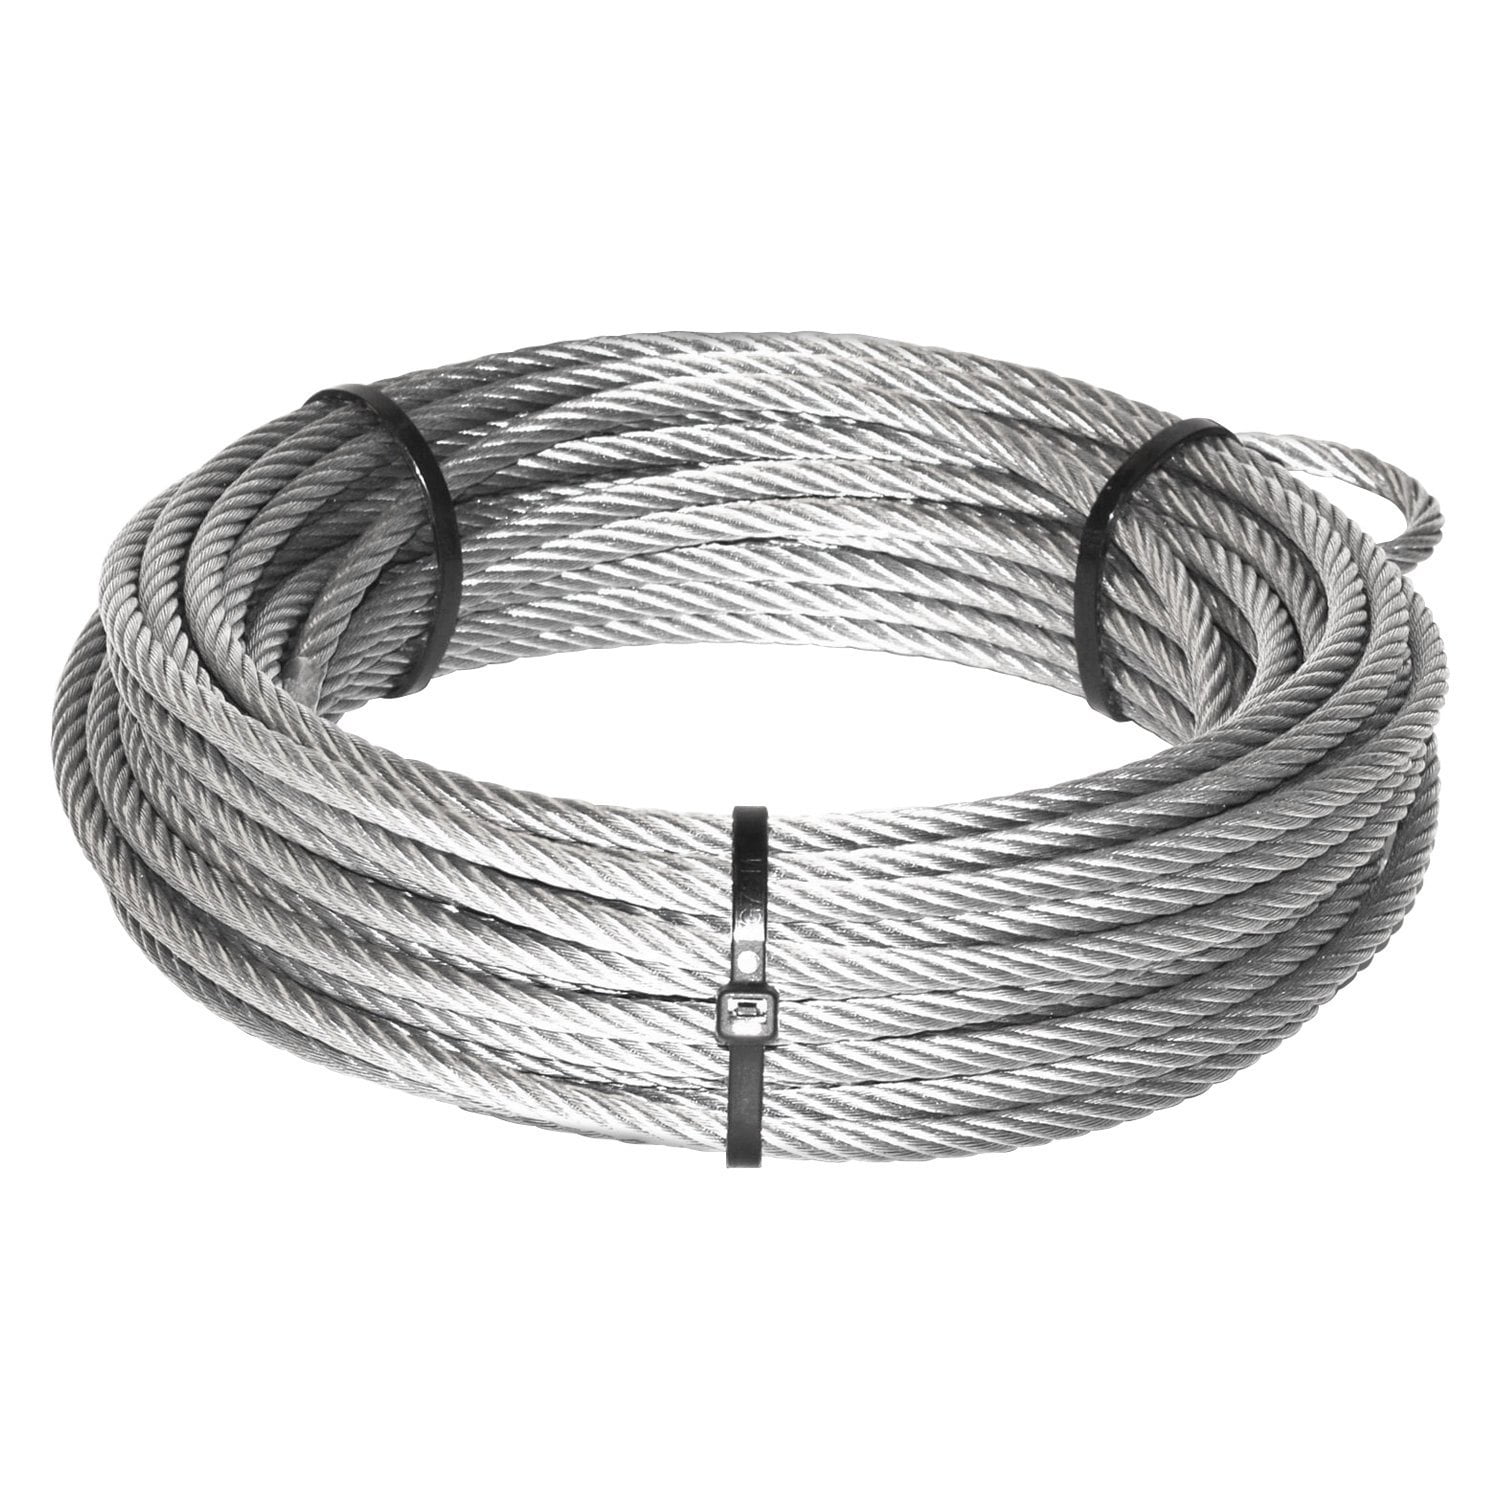 WARN 68851 - 7/32 x 55' Wire Replacement Rope with Hook For 4.0ci